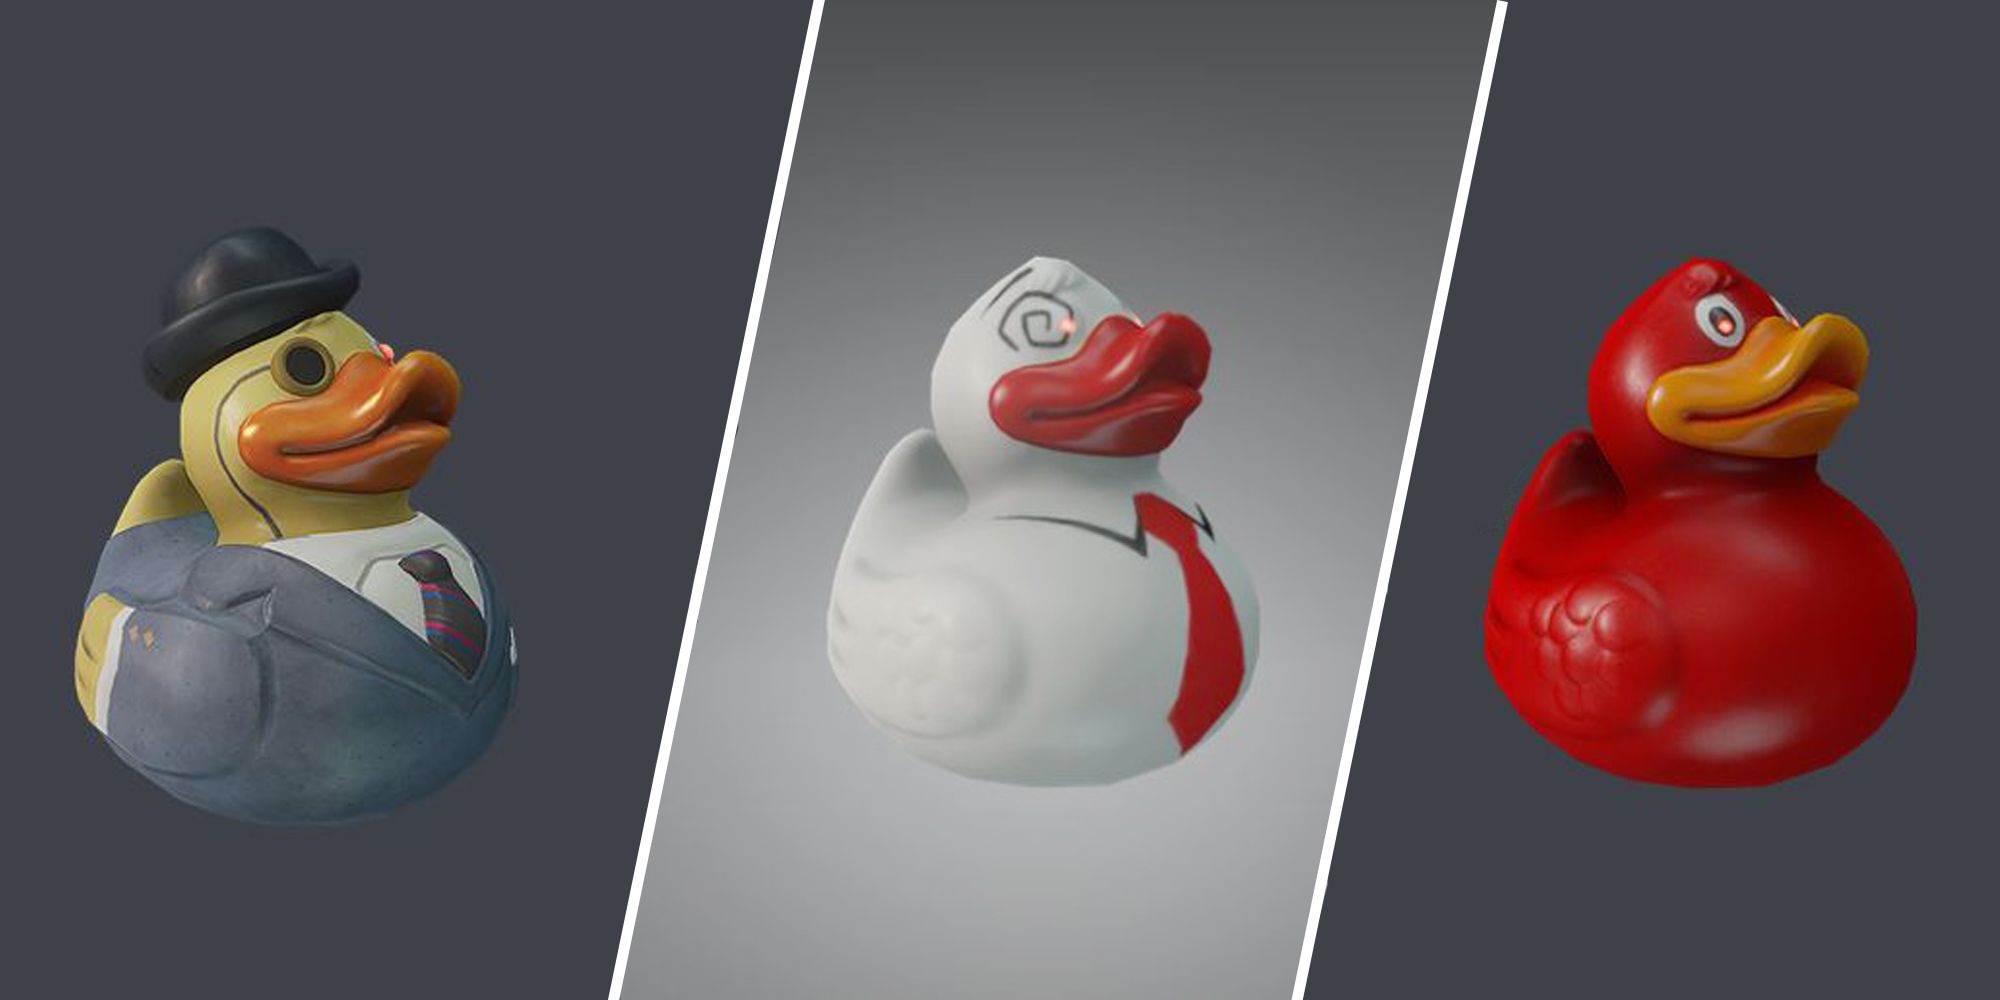 Three explosive rubber ducks from the Hitman games